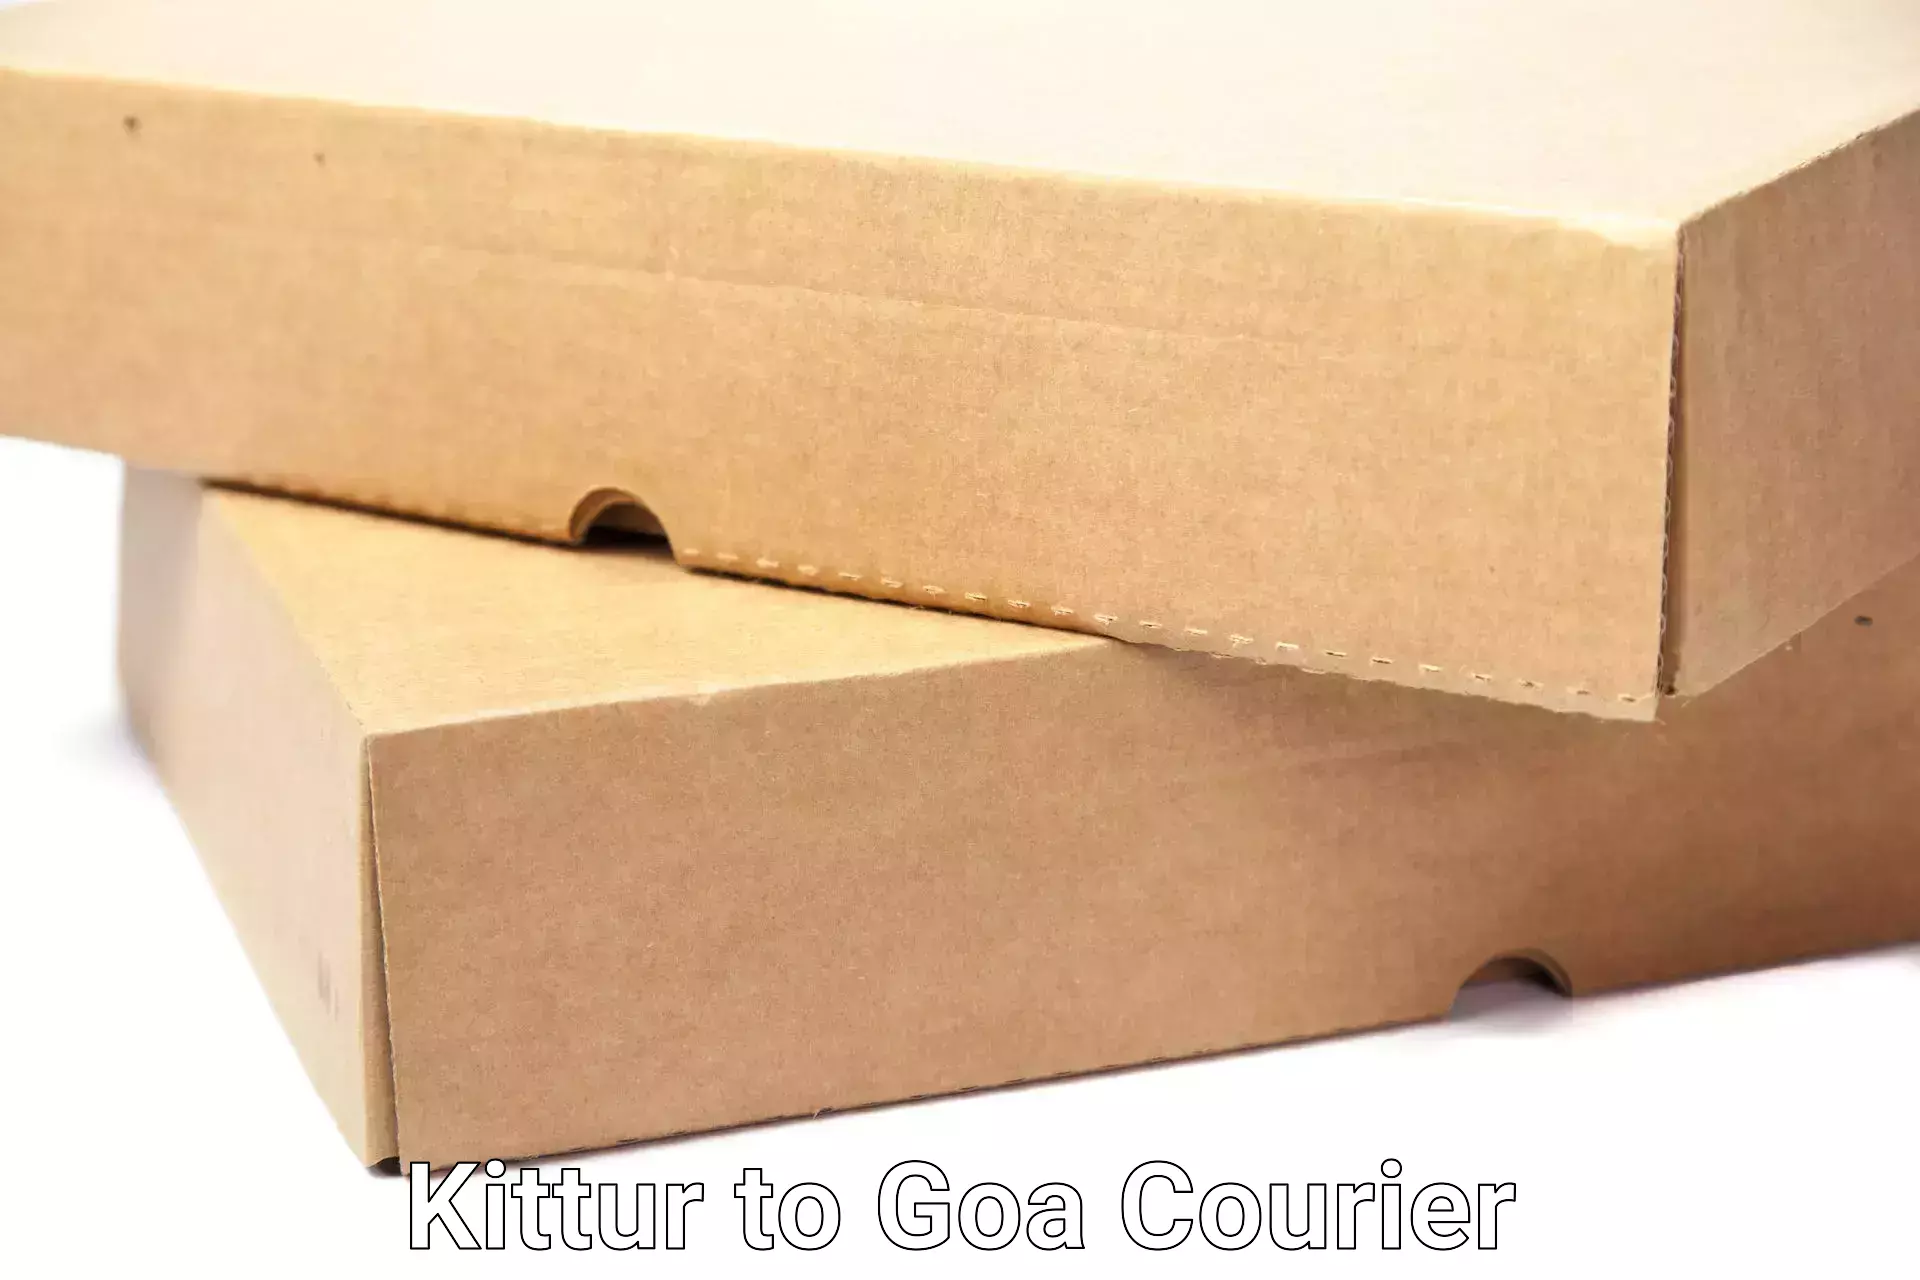 Furniture moving service Kittur to South Goa